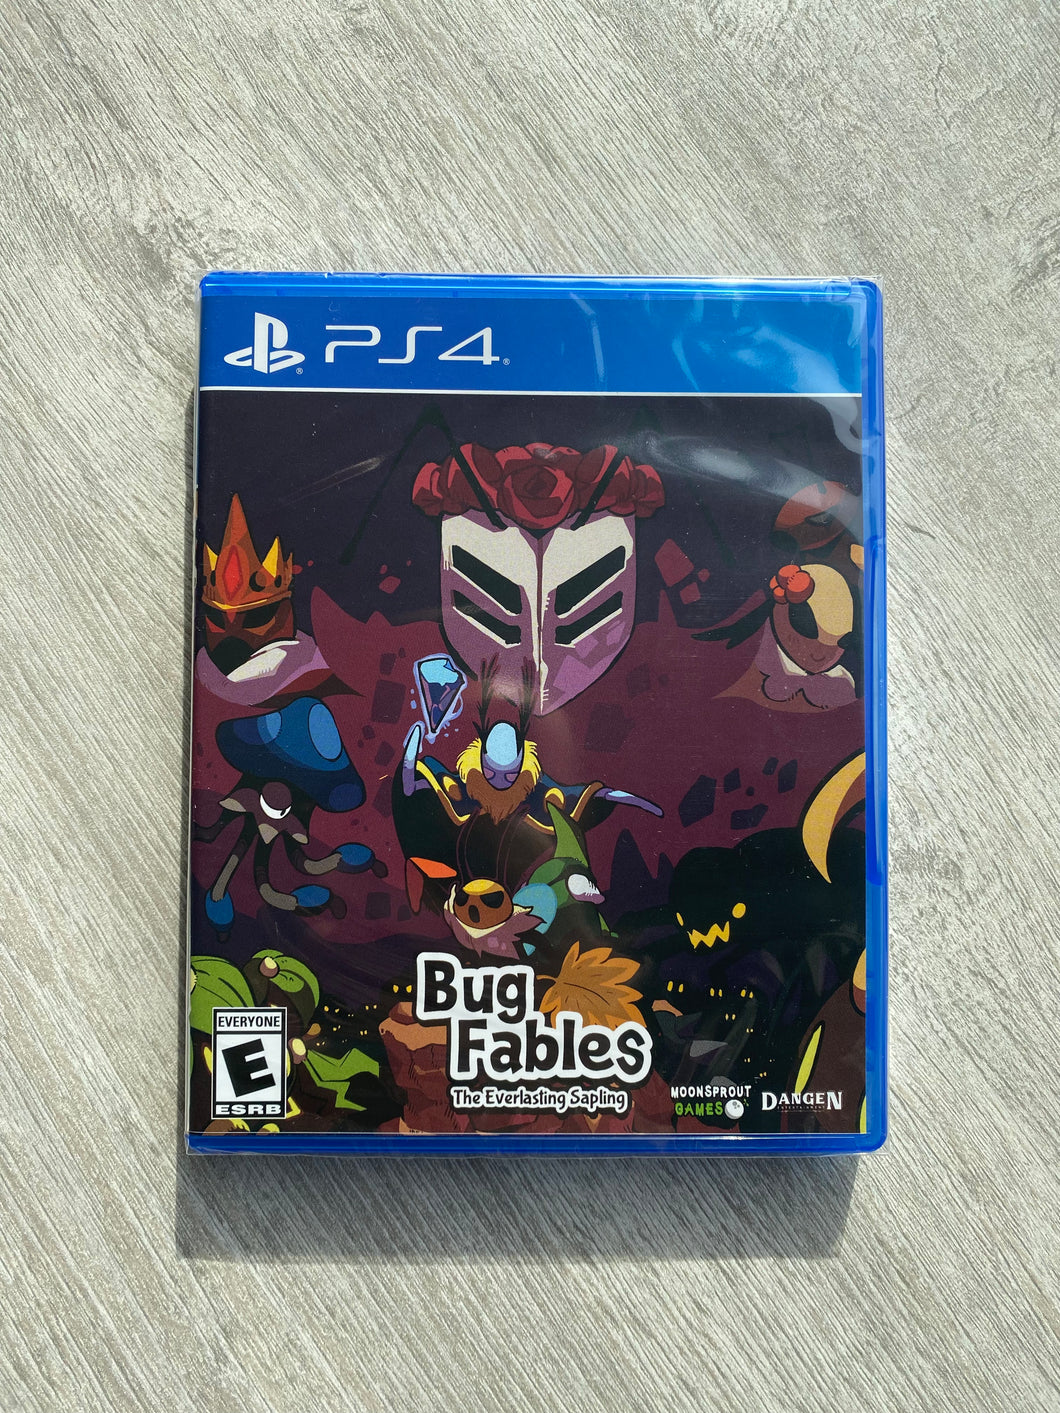 Bug fables The everlasting sapling / Limited run games / PS4